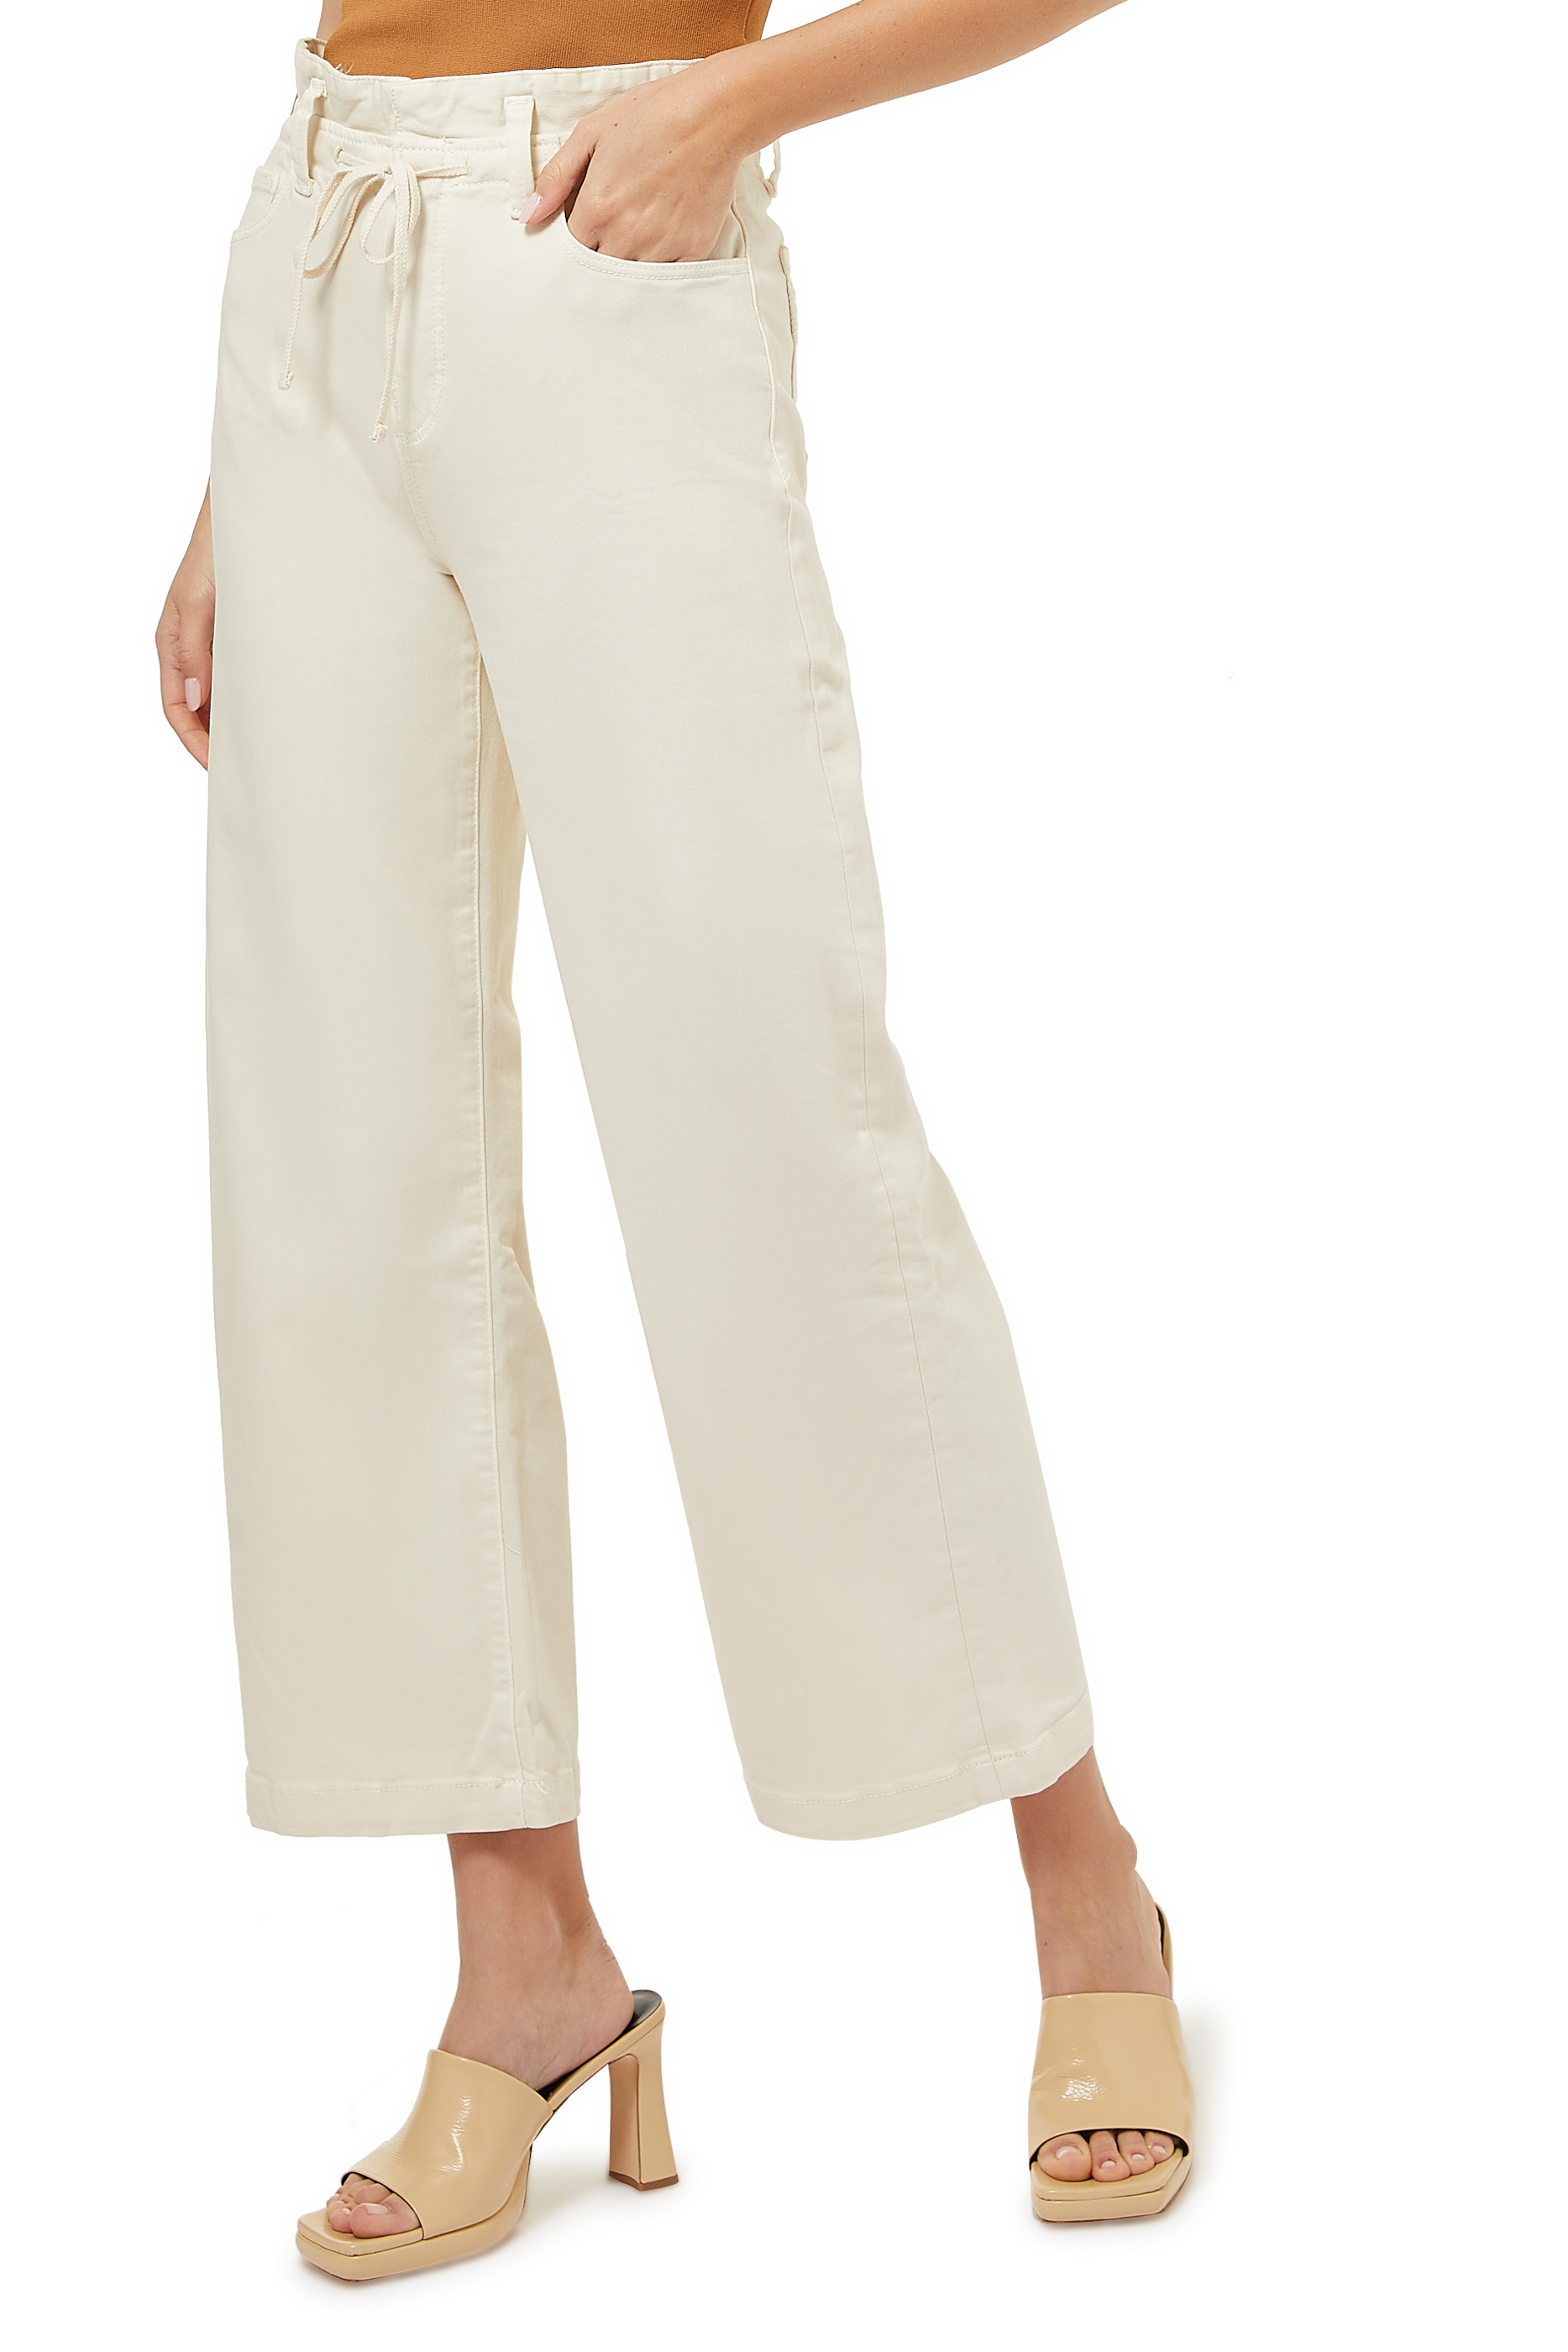 Buy Paige Carly Waist Tie Pants for Womens | Bloomingdale's Kuwait